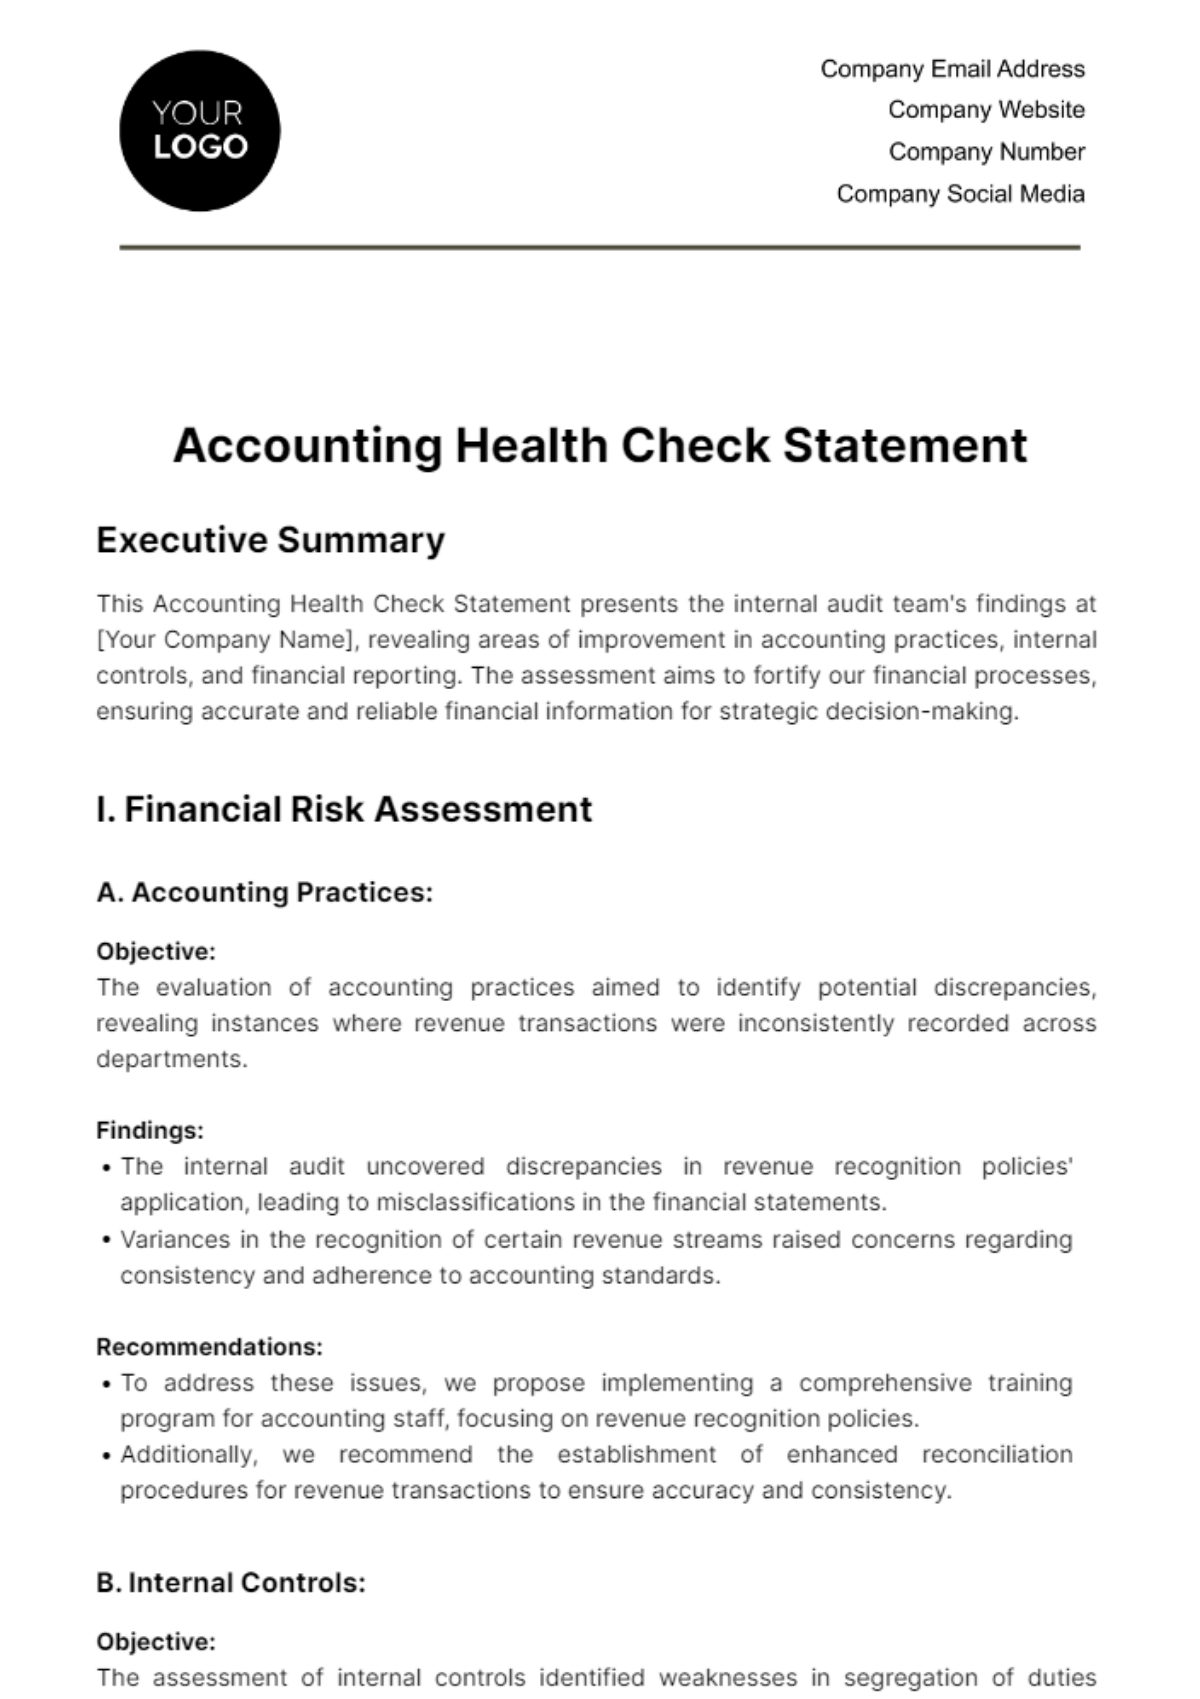 Free Accounting Health Check Statement Template